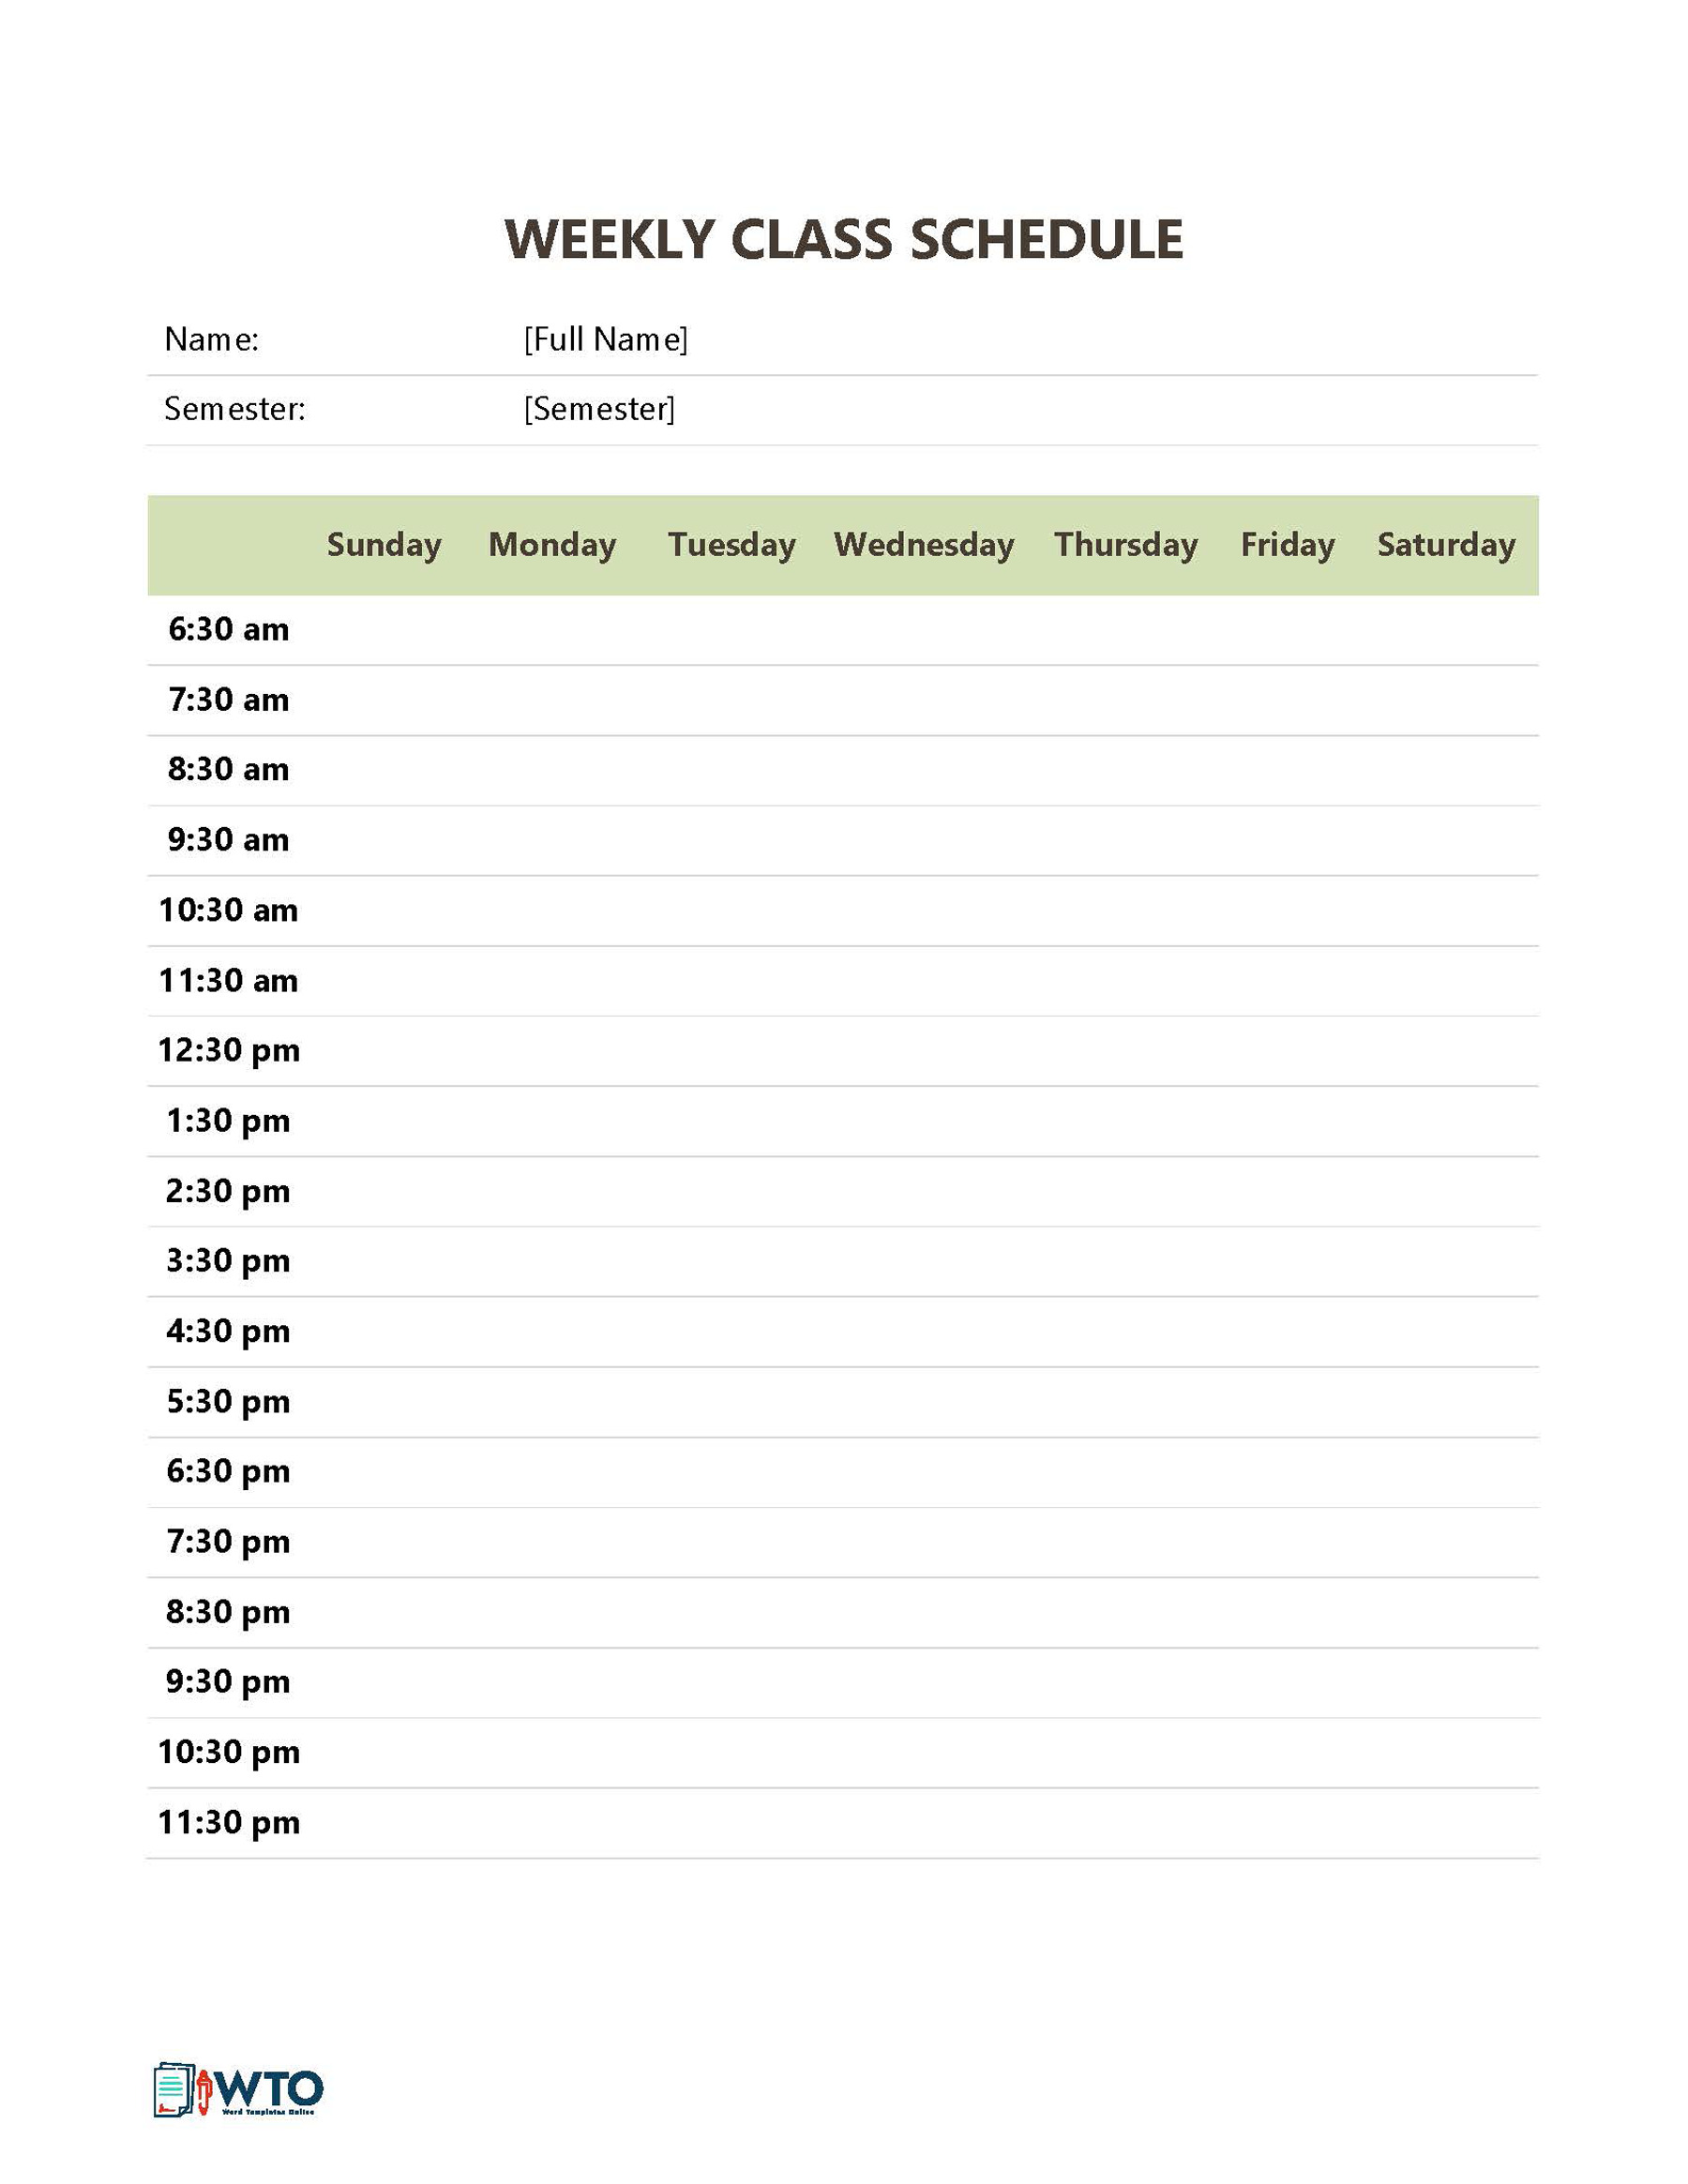 Free Weekly Class Schedule Template - Editable Format